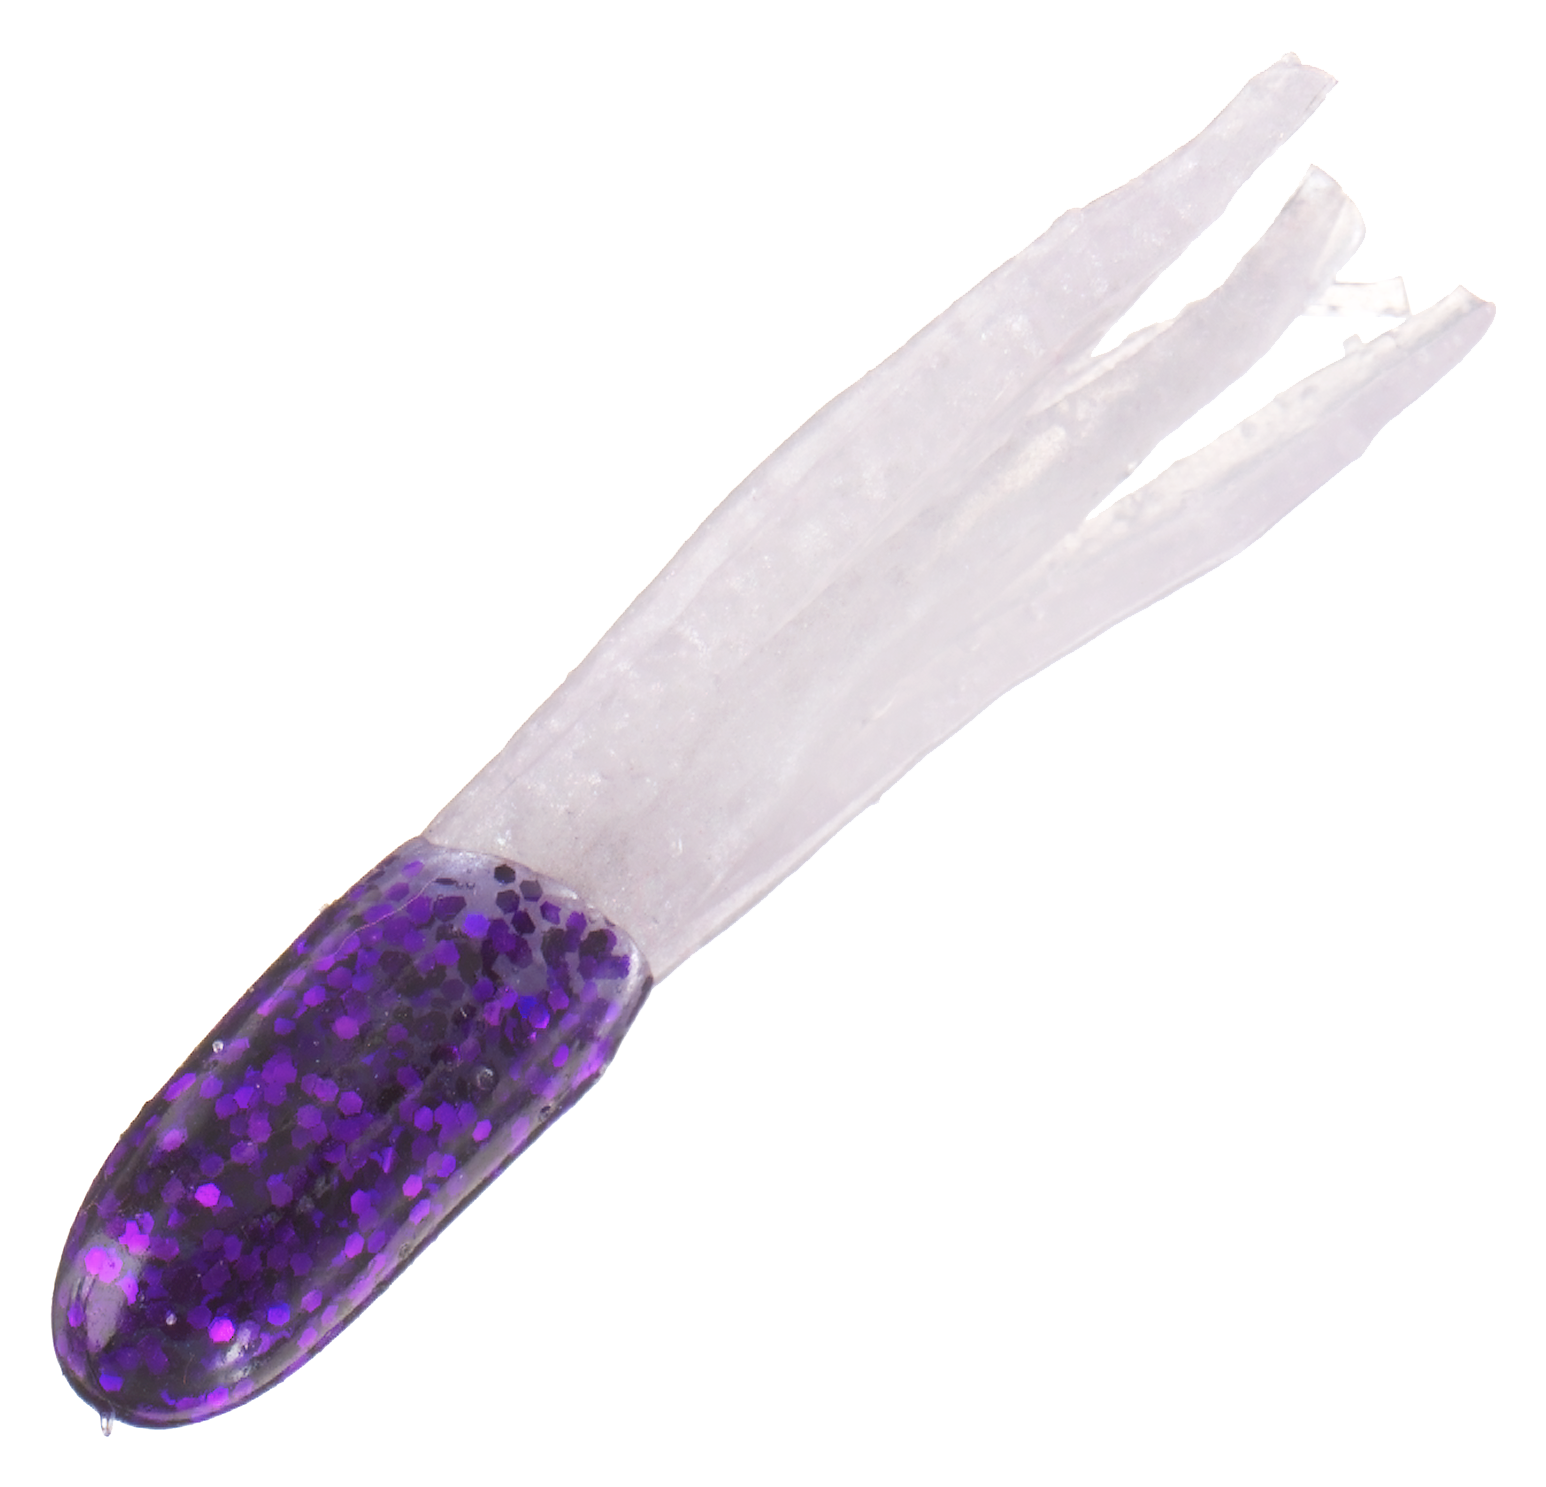 Bass Pro Shops Sparkle Squirts - 1-1/2″ - 15 pack - Electric Purple/White